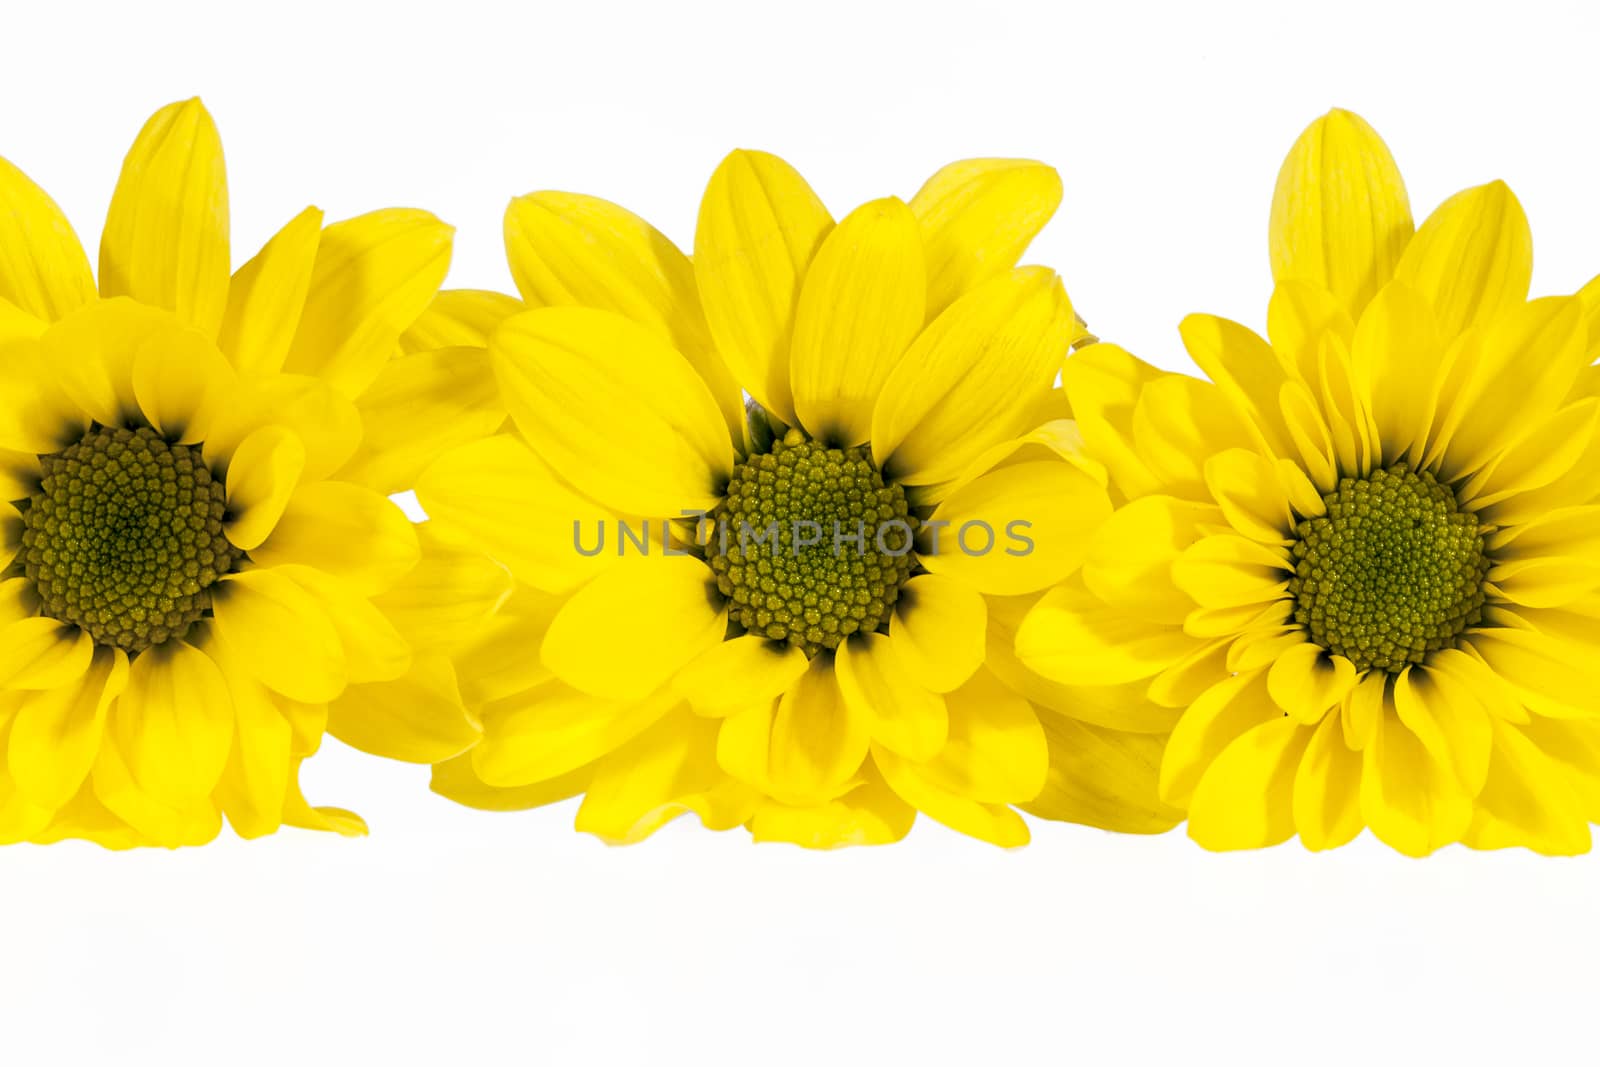 Flowers of yellow marguerite  isolated on white background by mychadre77